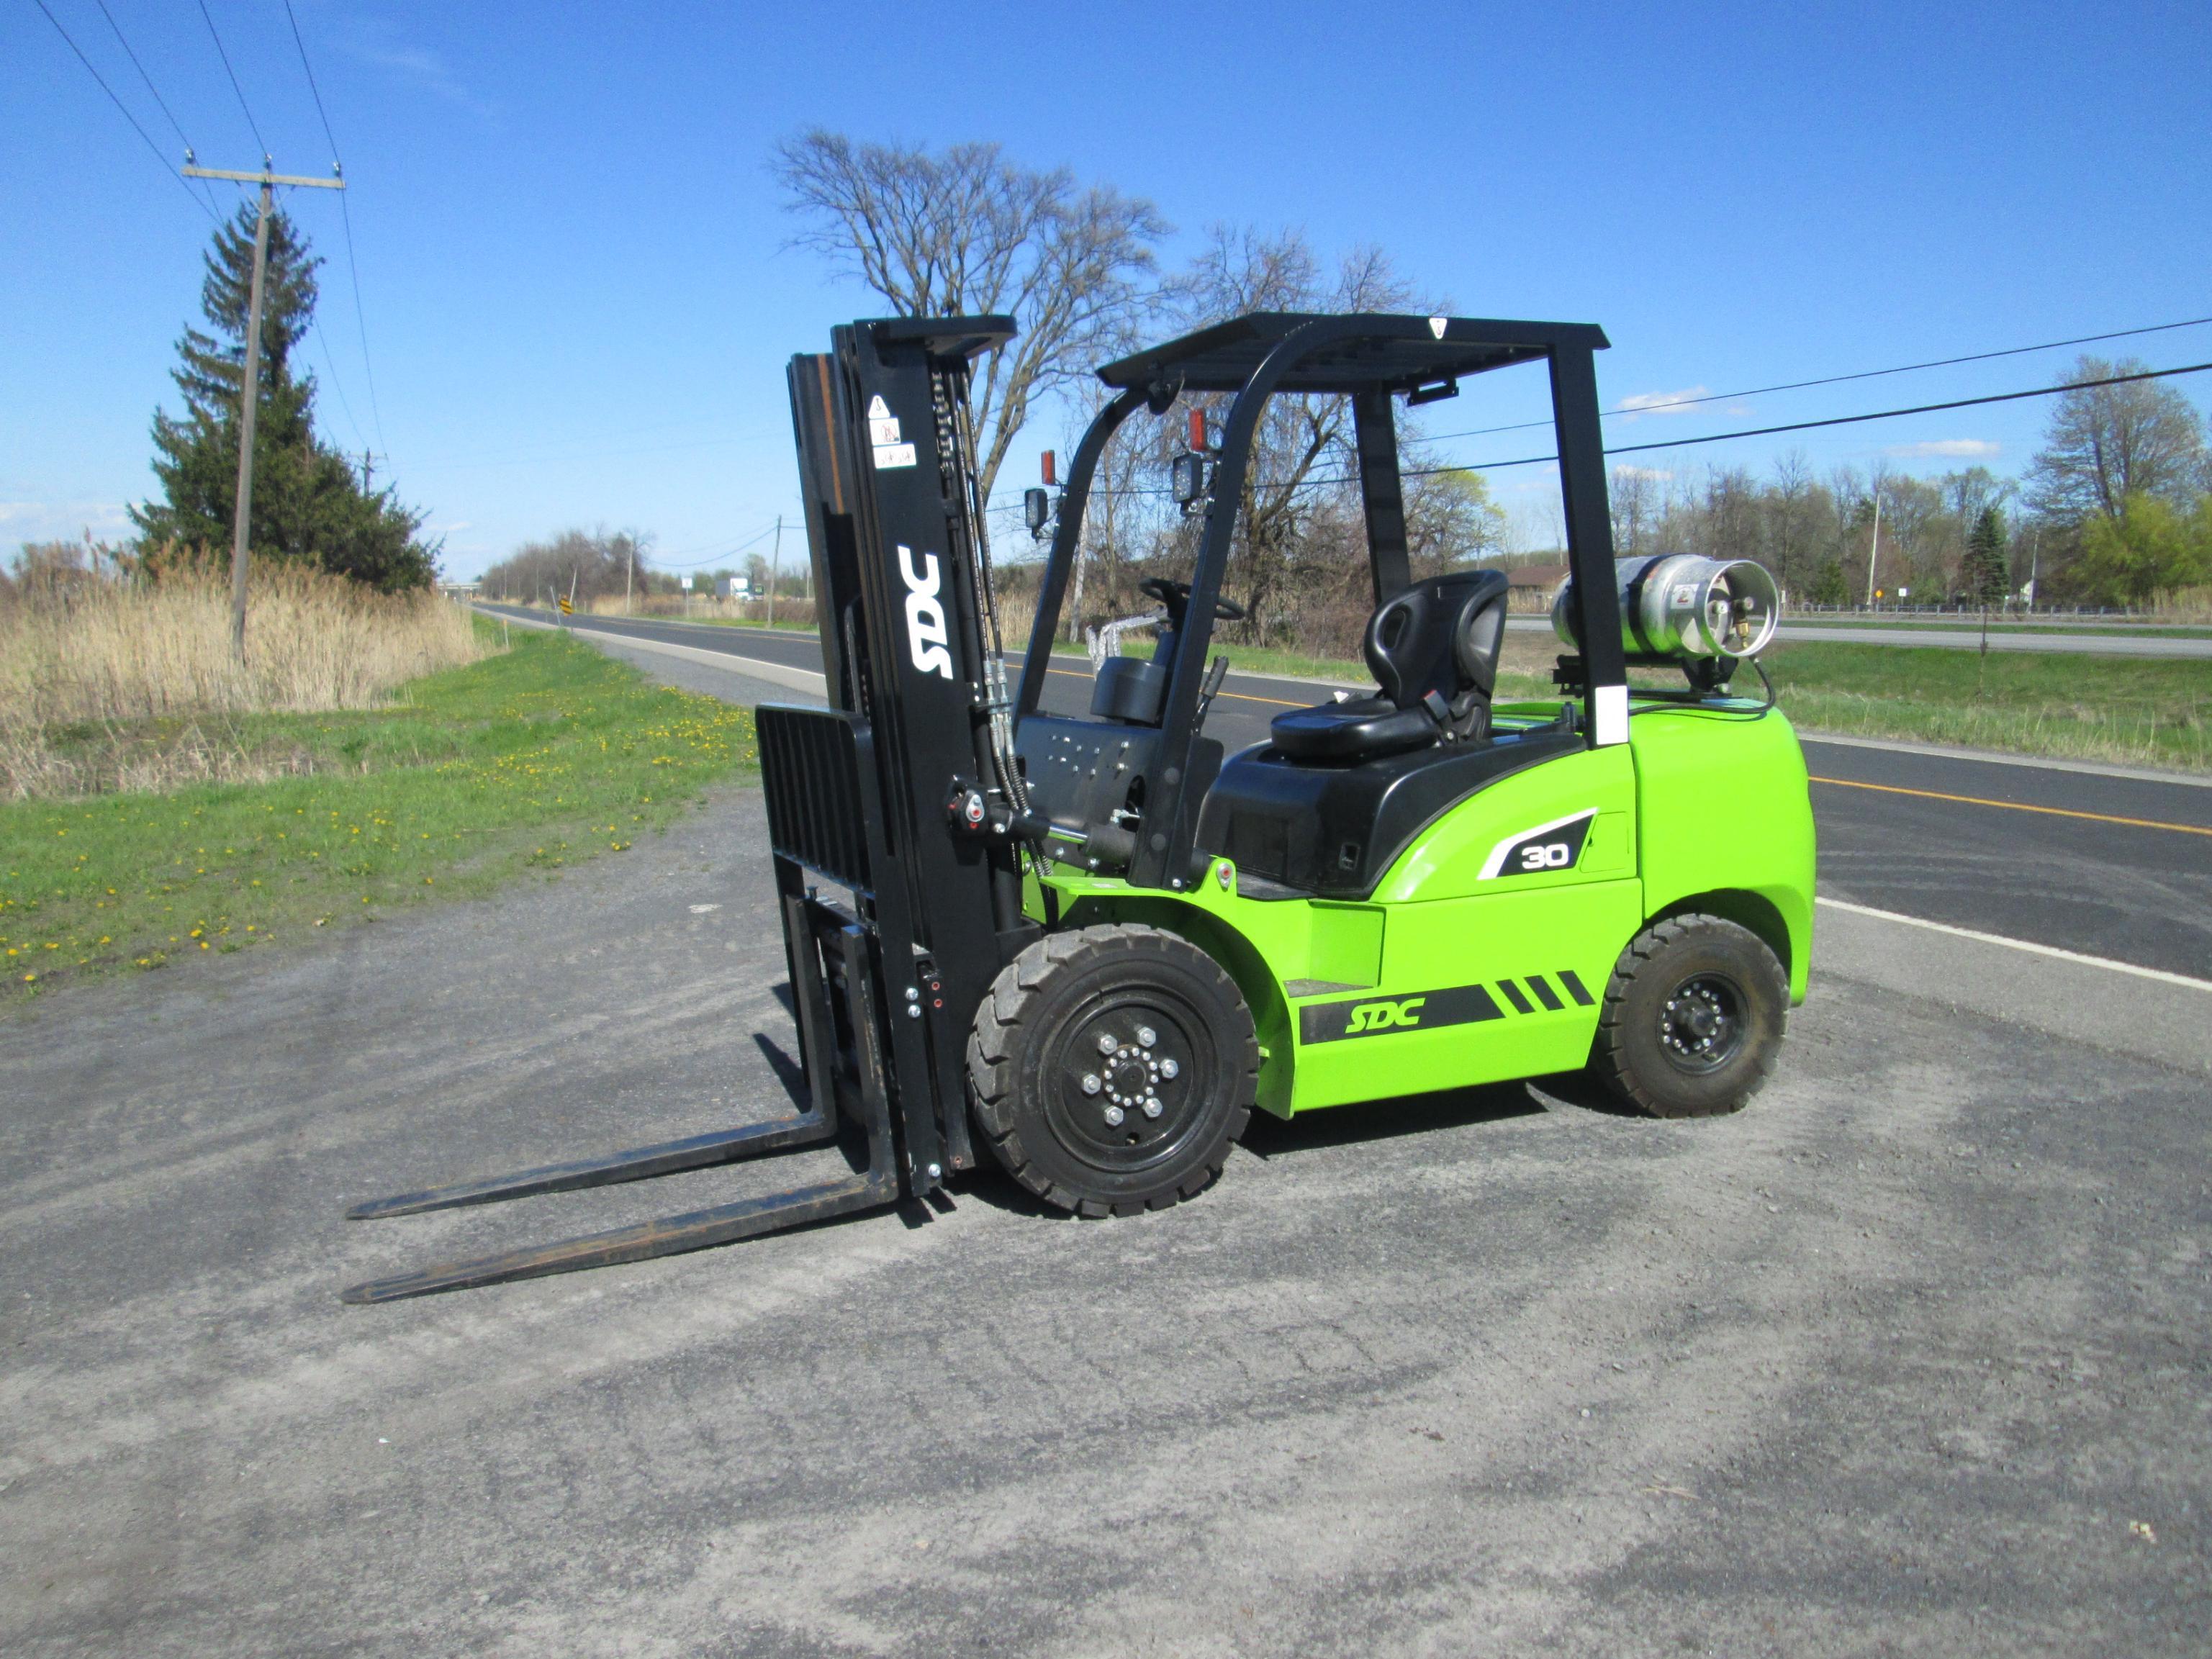 FORKLIFT NEW VIFT FG30L 6,500lbs forklift SN 04737S equipped with NISSAN 4 cyl gasoline / LPG